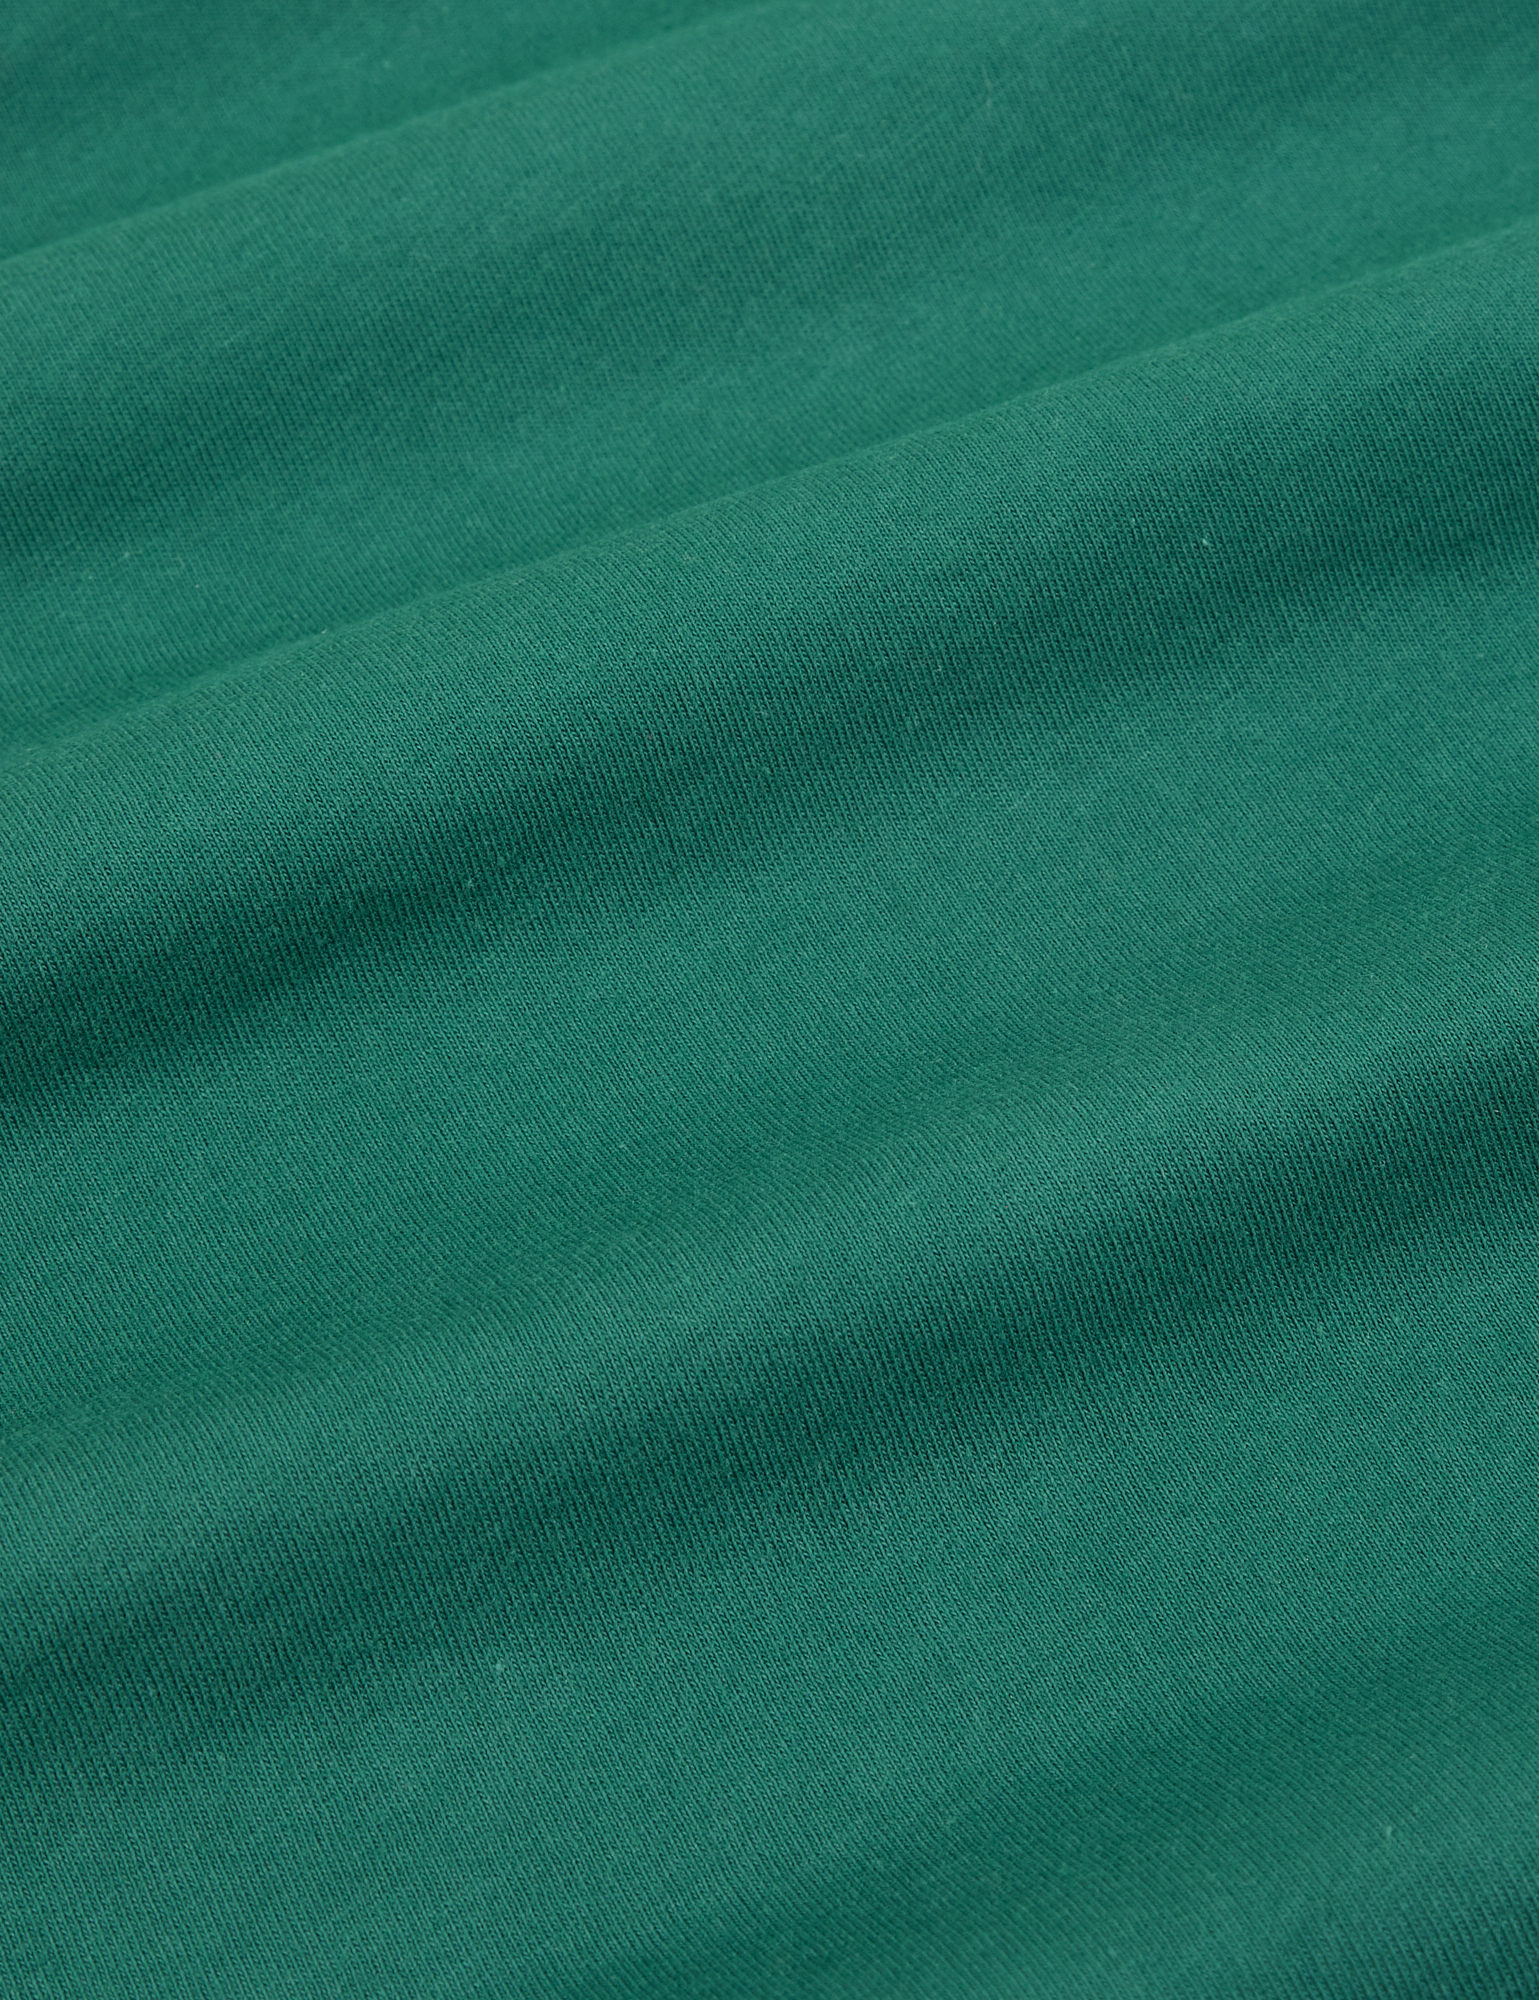 Organic Vintage Tee in Hunter Green fabric detail close up